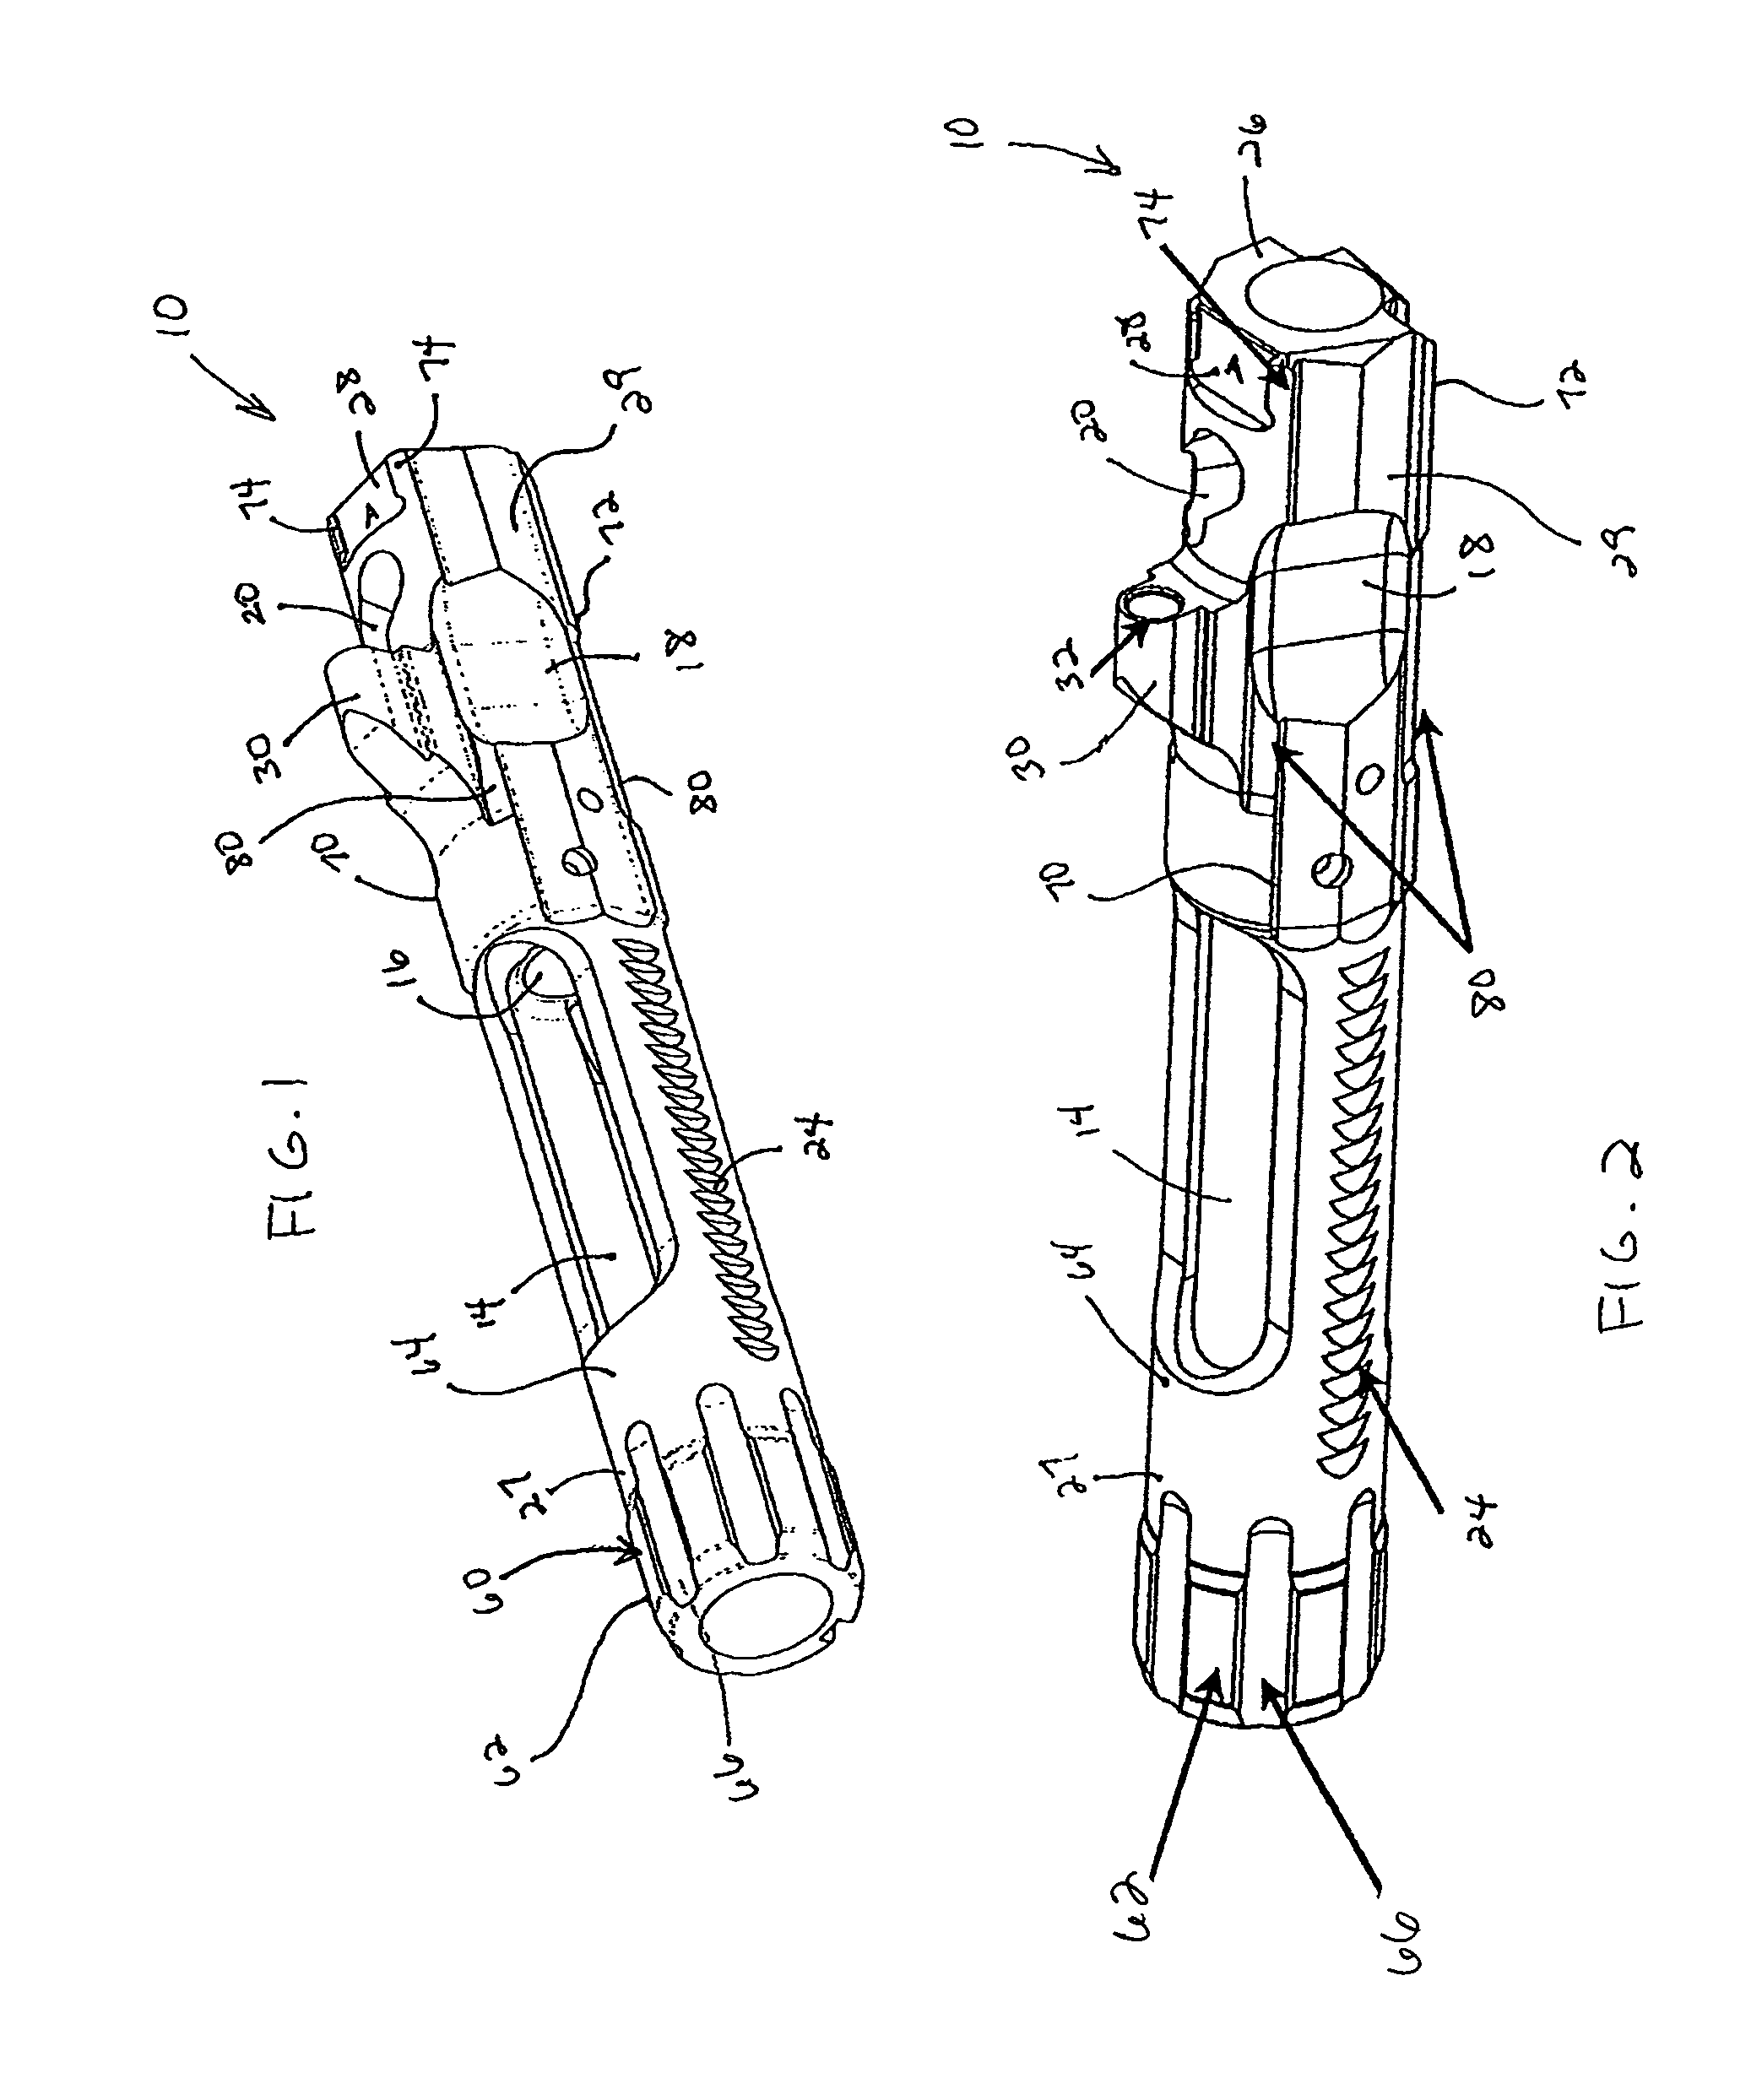 Self loading firearm bolt carrier with integral carrier key and angled strike face